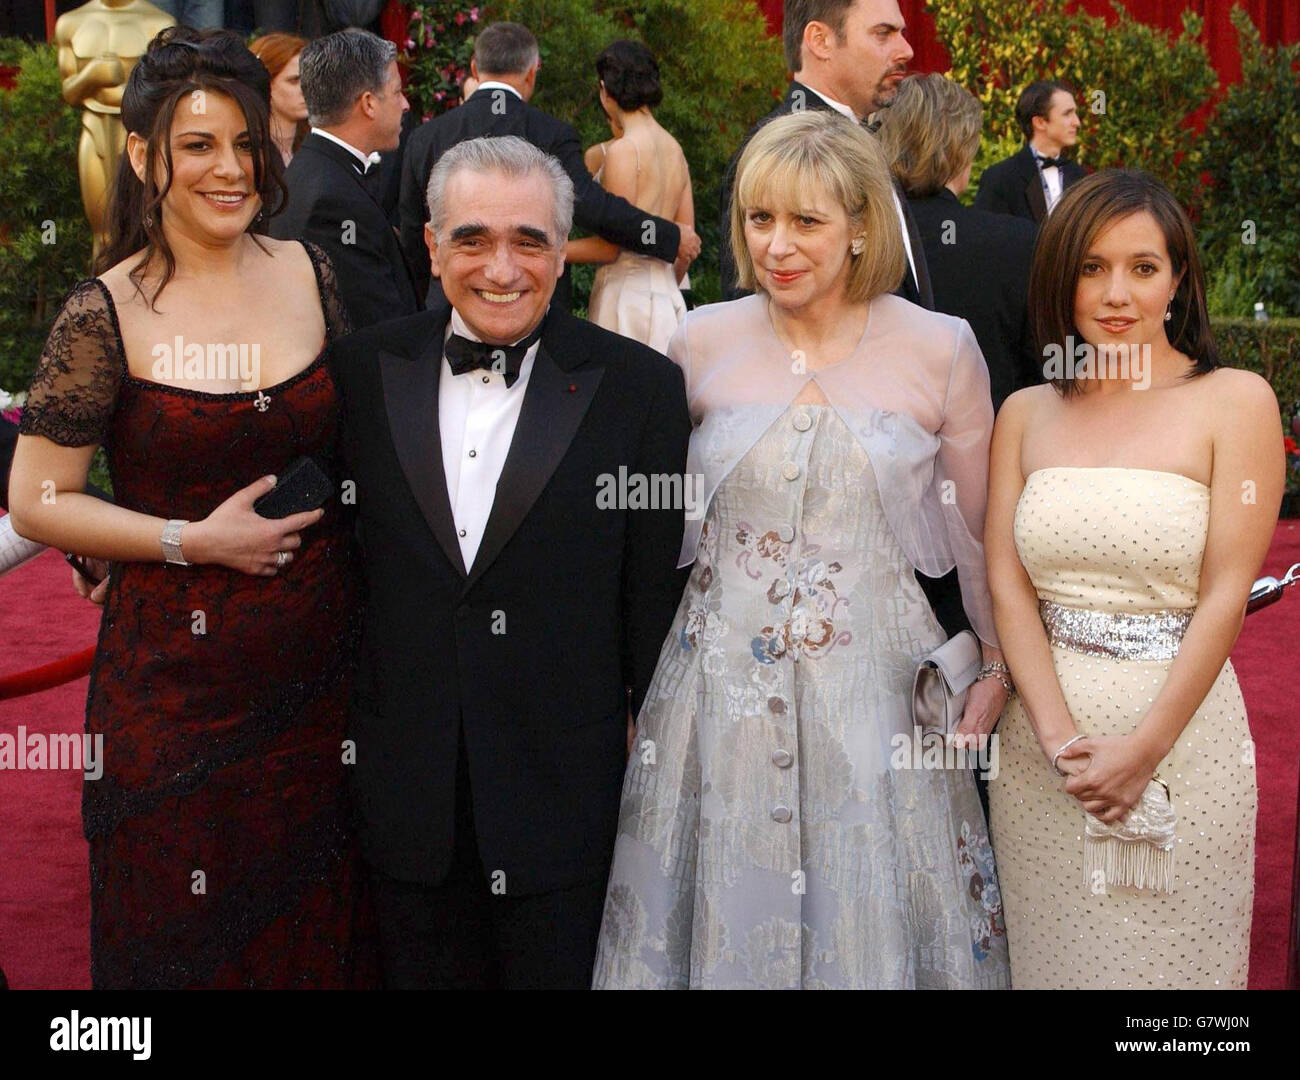 Martin Scorsese with wife Helen and his daughters Julia and Domenica Cameron arrive. Stock Photo